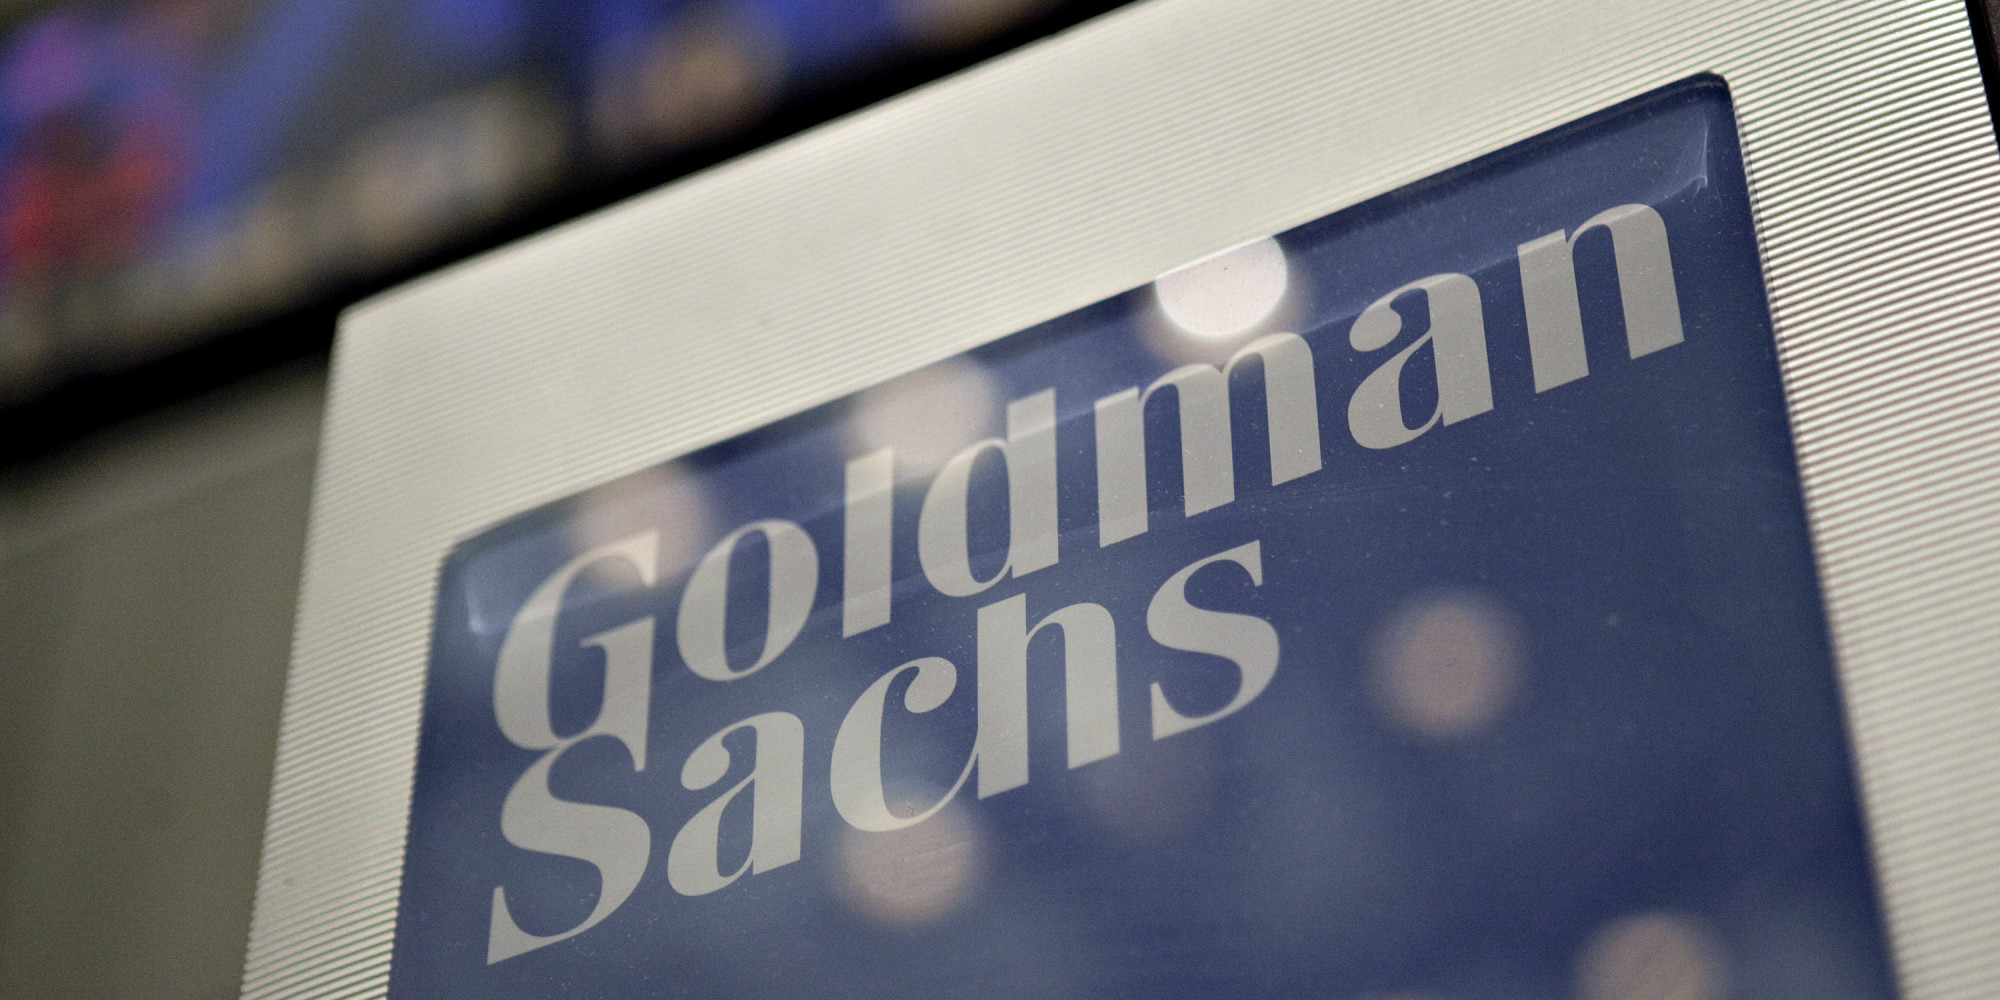 how-an-undocumented-immigrant-from-mexico-became-a-star-at-goldman-sachs-huffpost